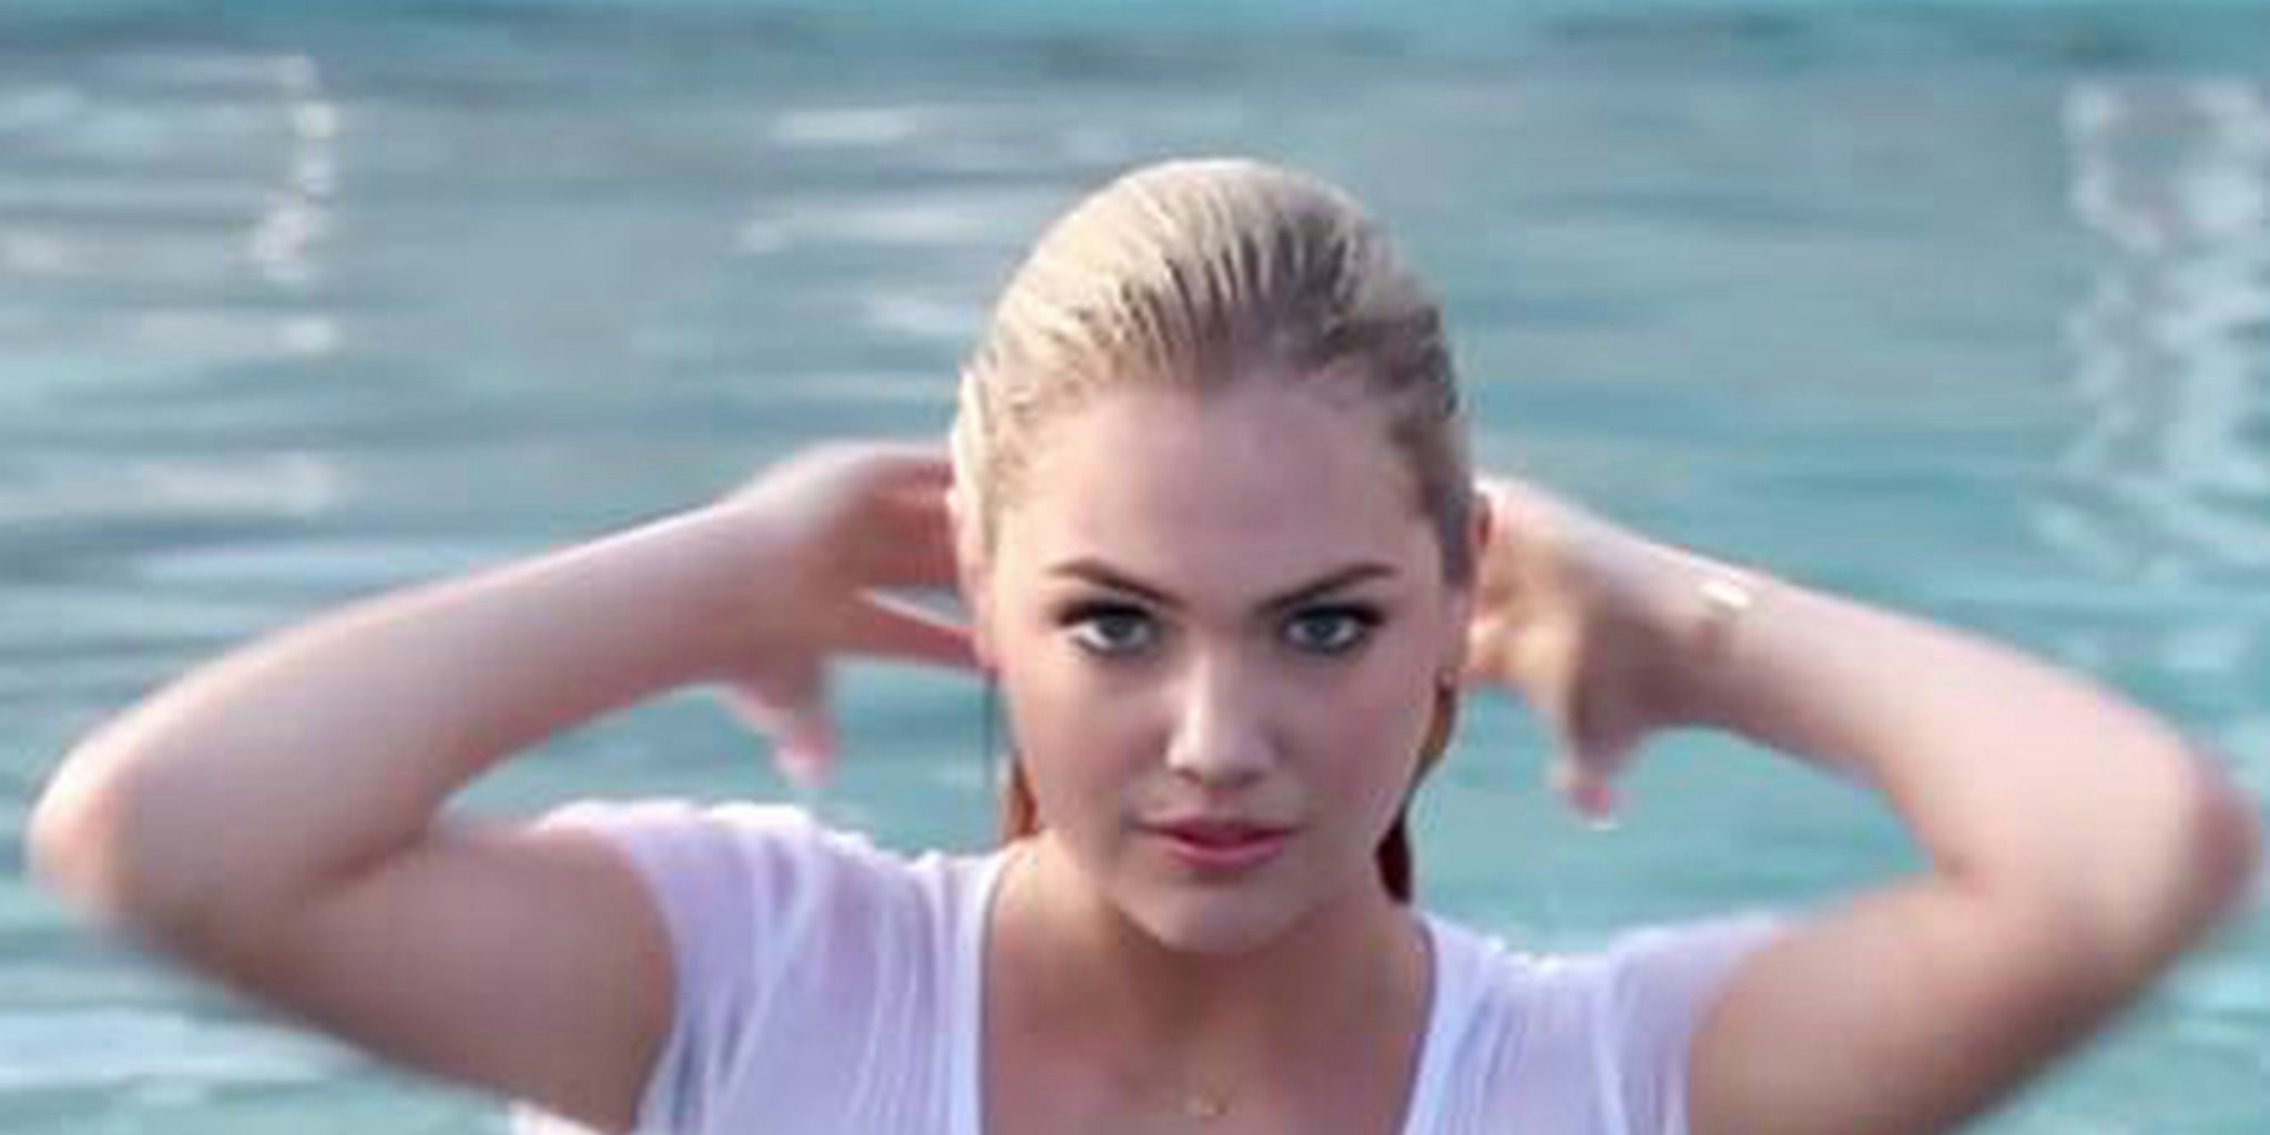 Kate Upton Running On Beach - Another Kate Upton video stripped from YouTube - The Daily Dot